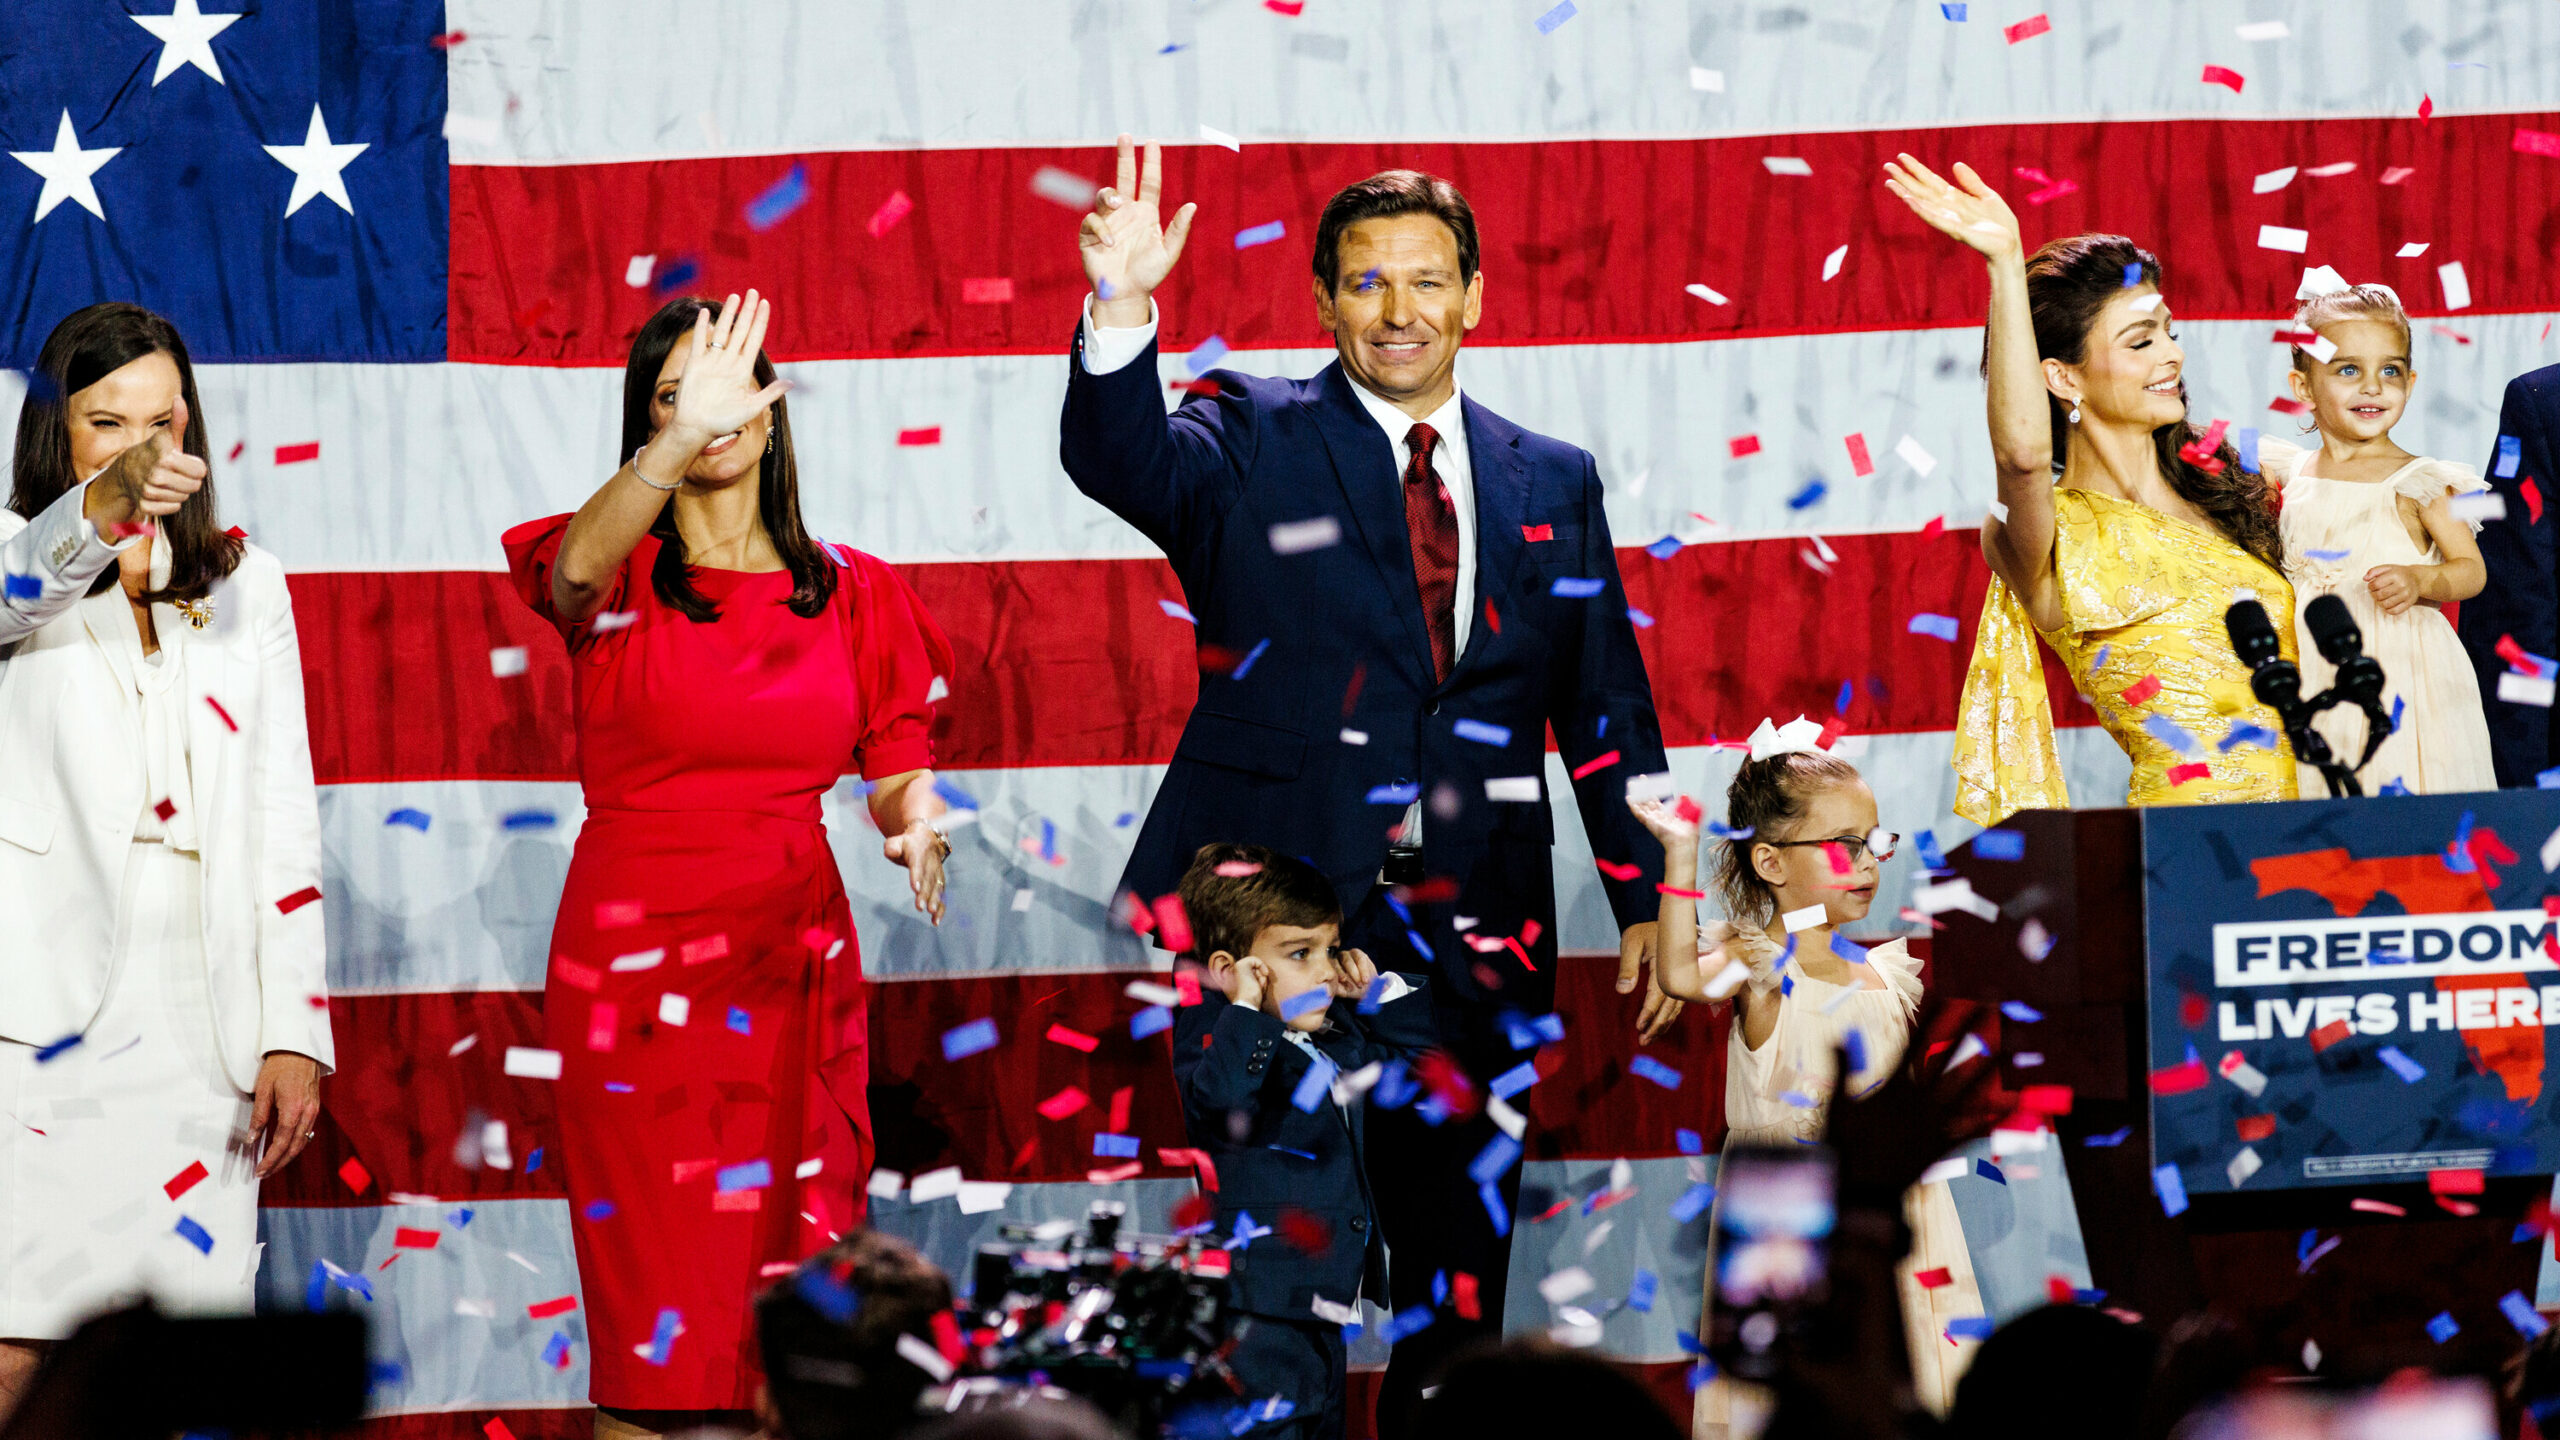 For the sake of the GOP and America, Ron DeSantis should be the conservative standardbearer